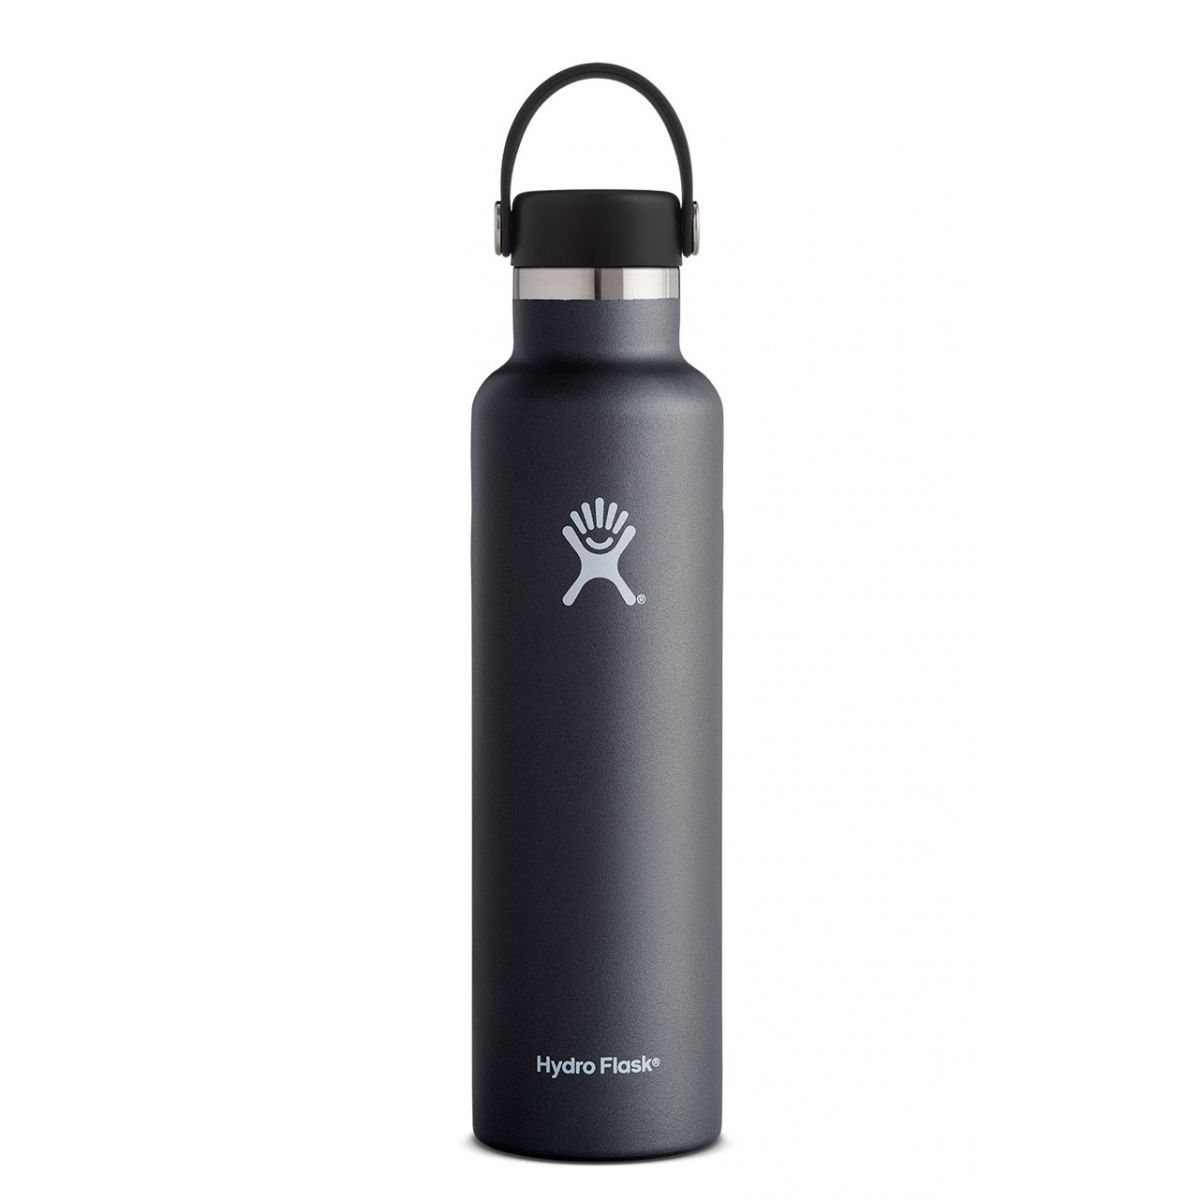 Hydro Flask 24 oz Standard Mouth - Isolierflasche 682 mL